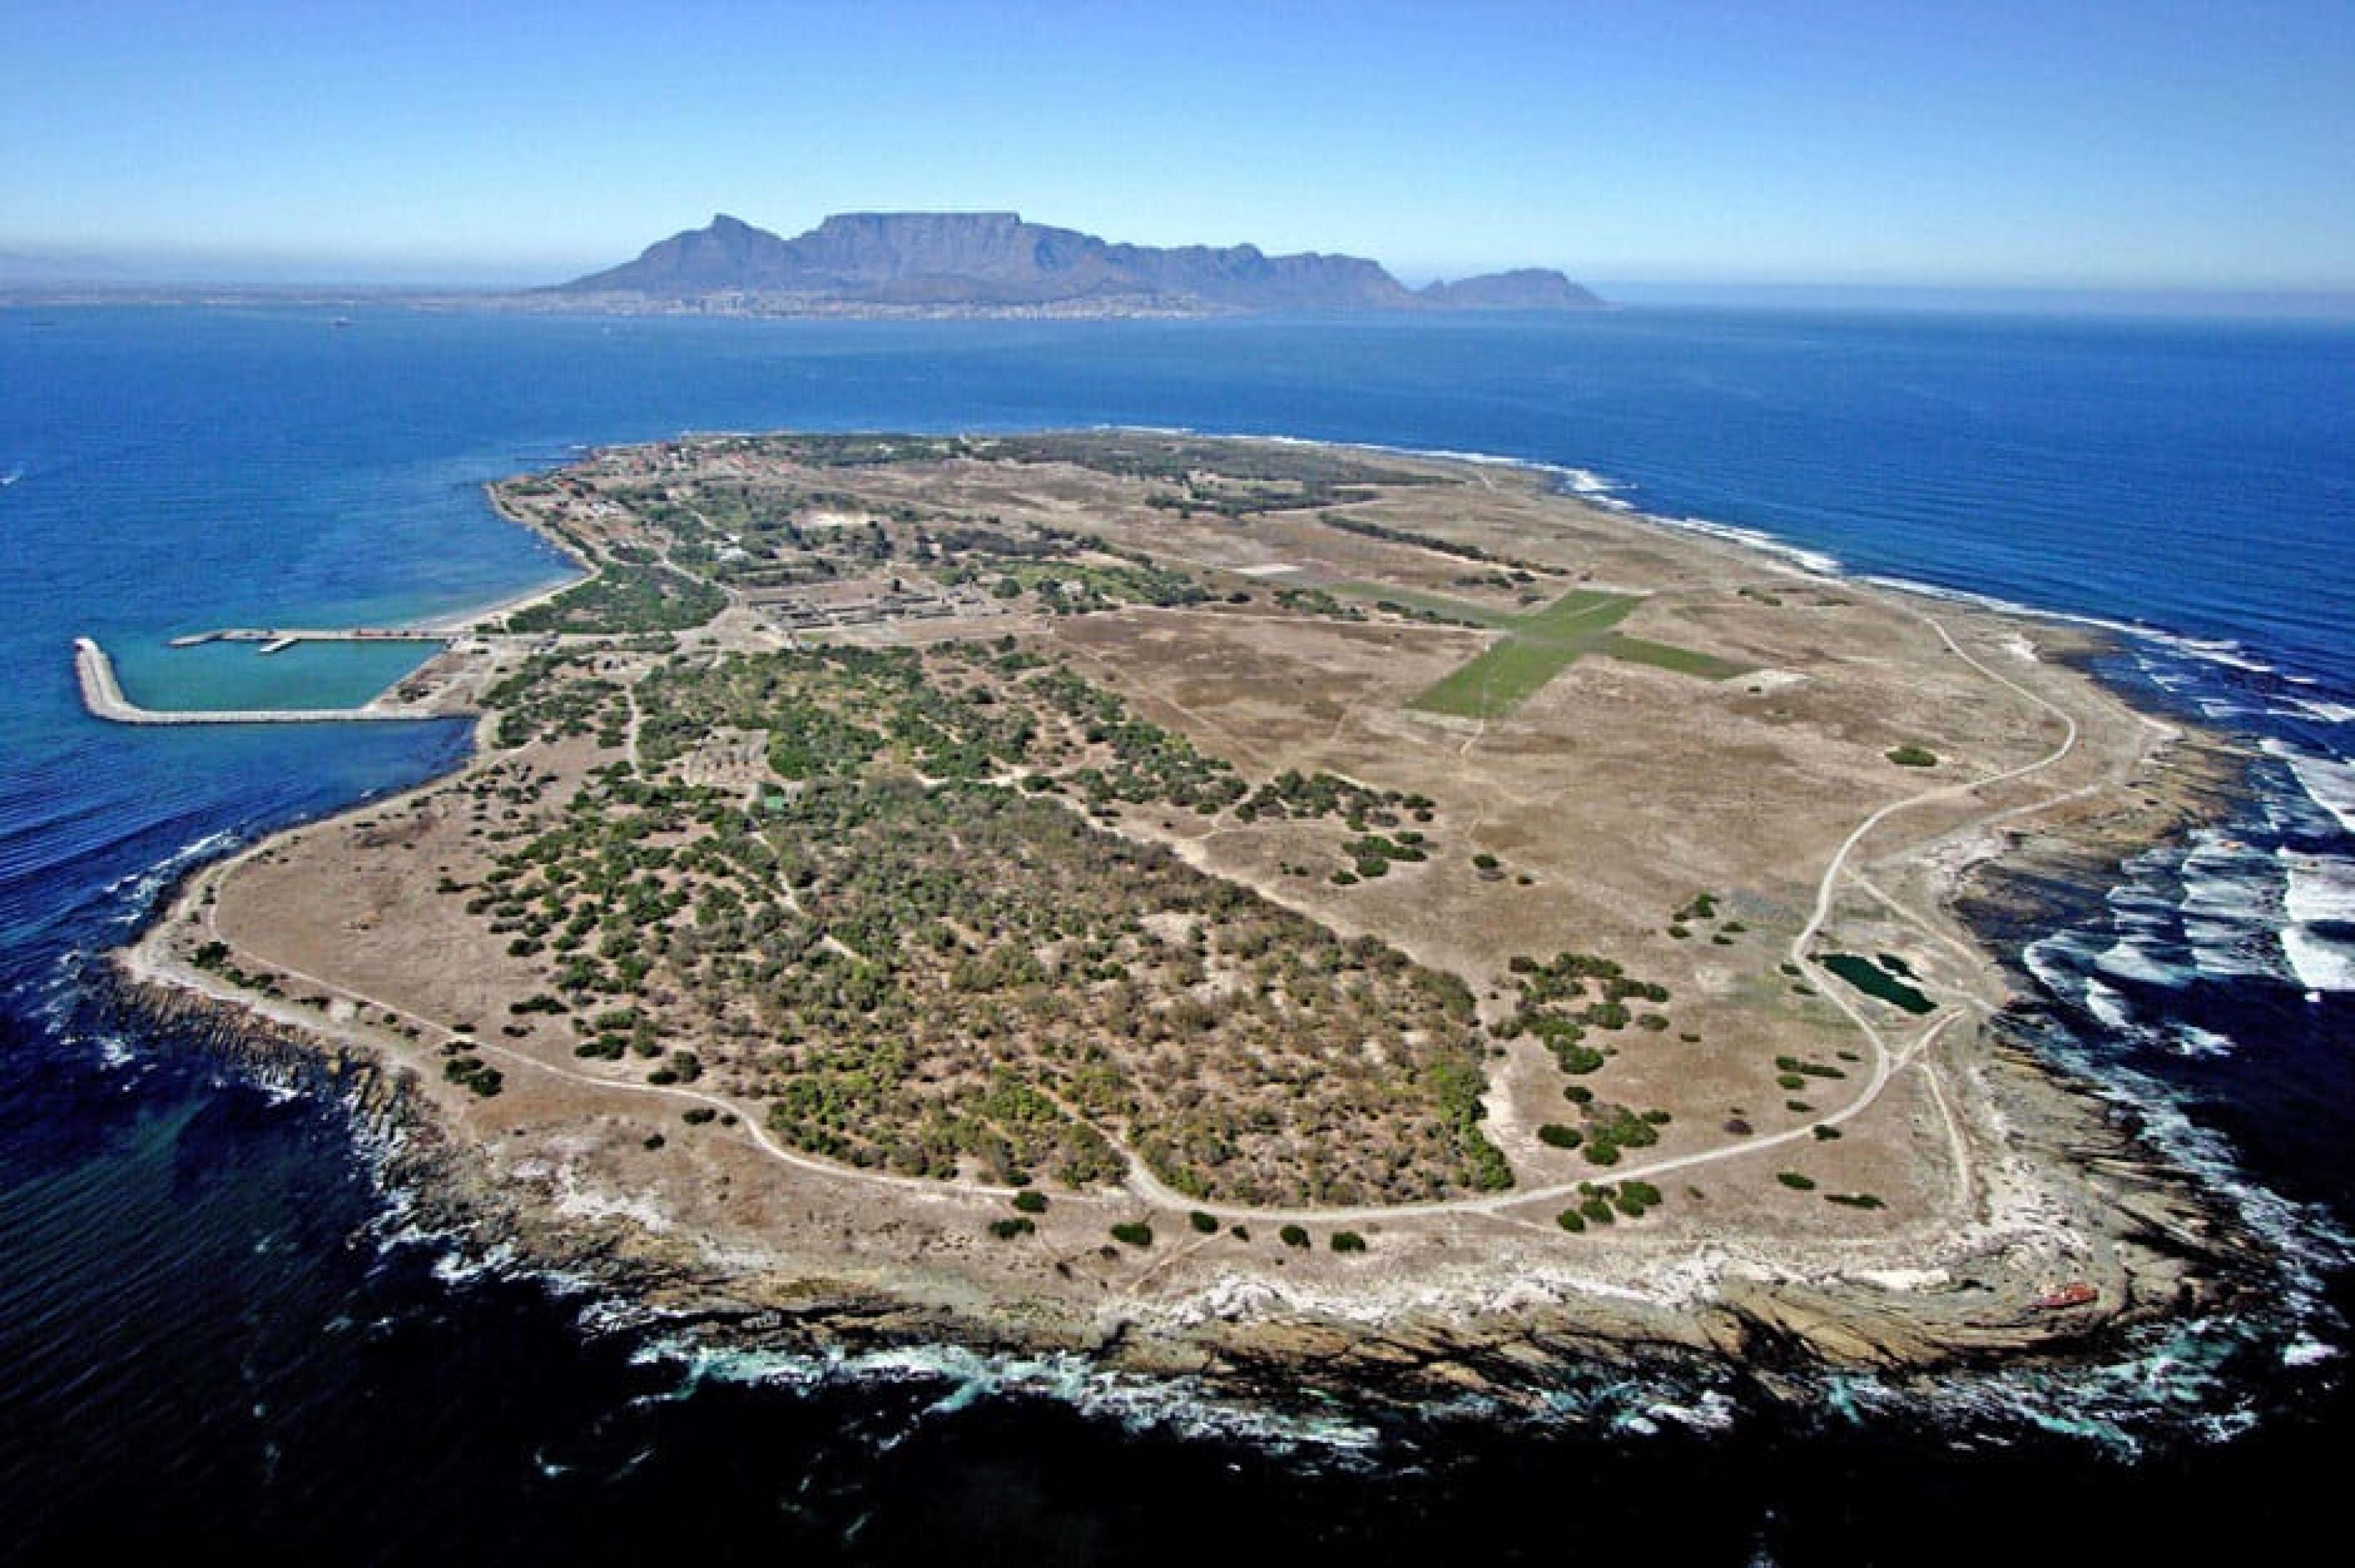 Aerial View-Robben Island ,Cape Town, South Africa-Courtesy of Cape Town Tourism